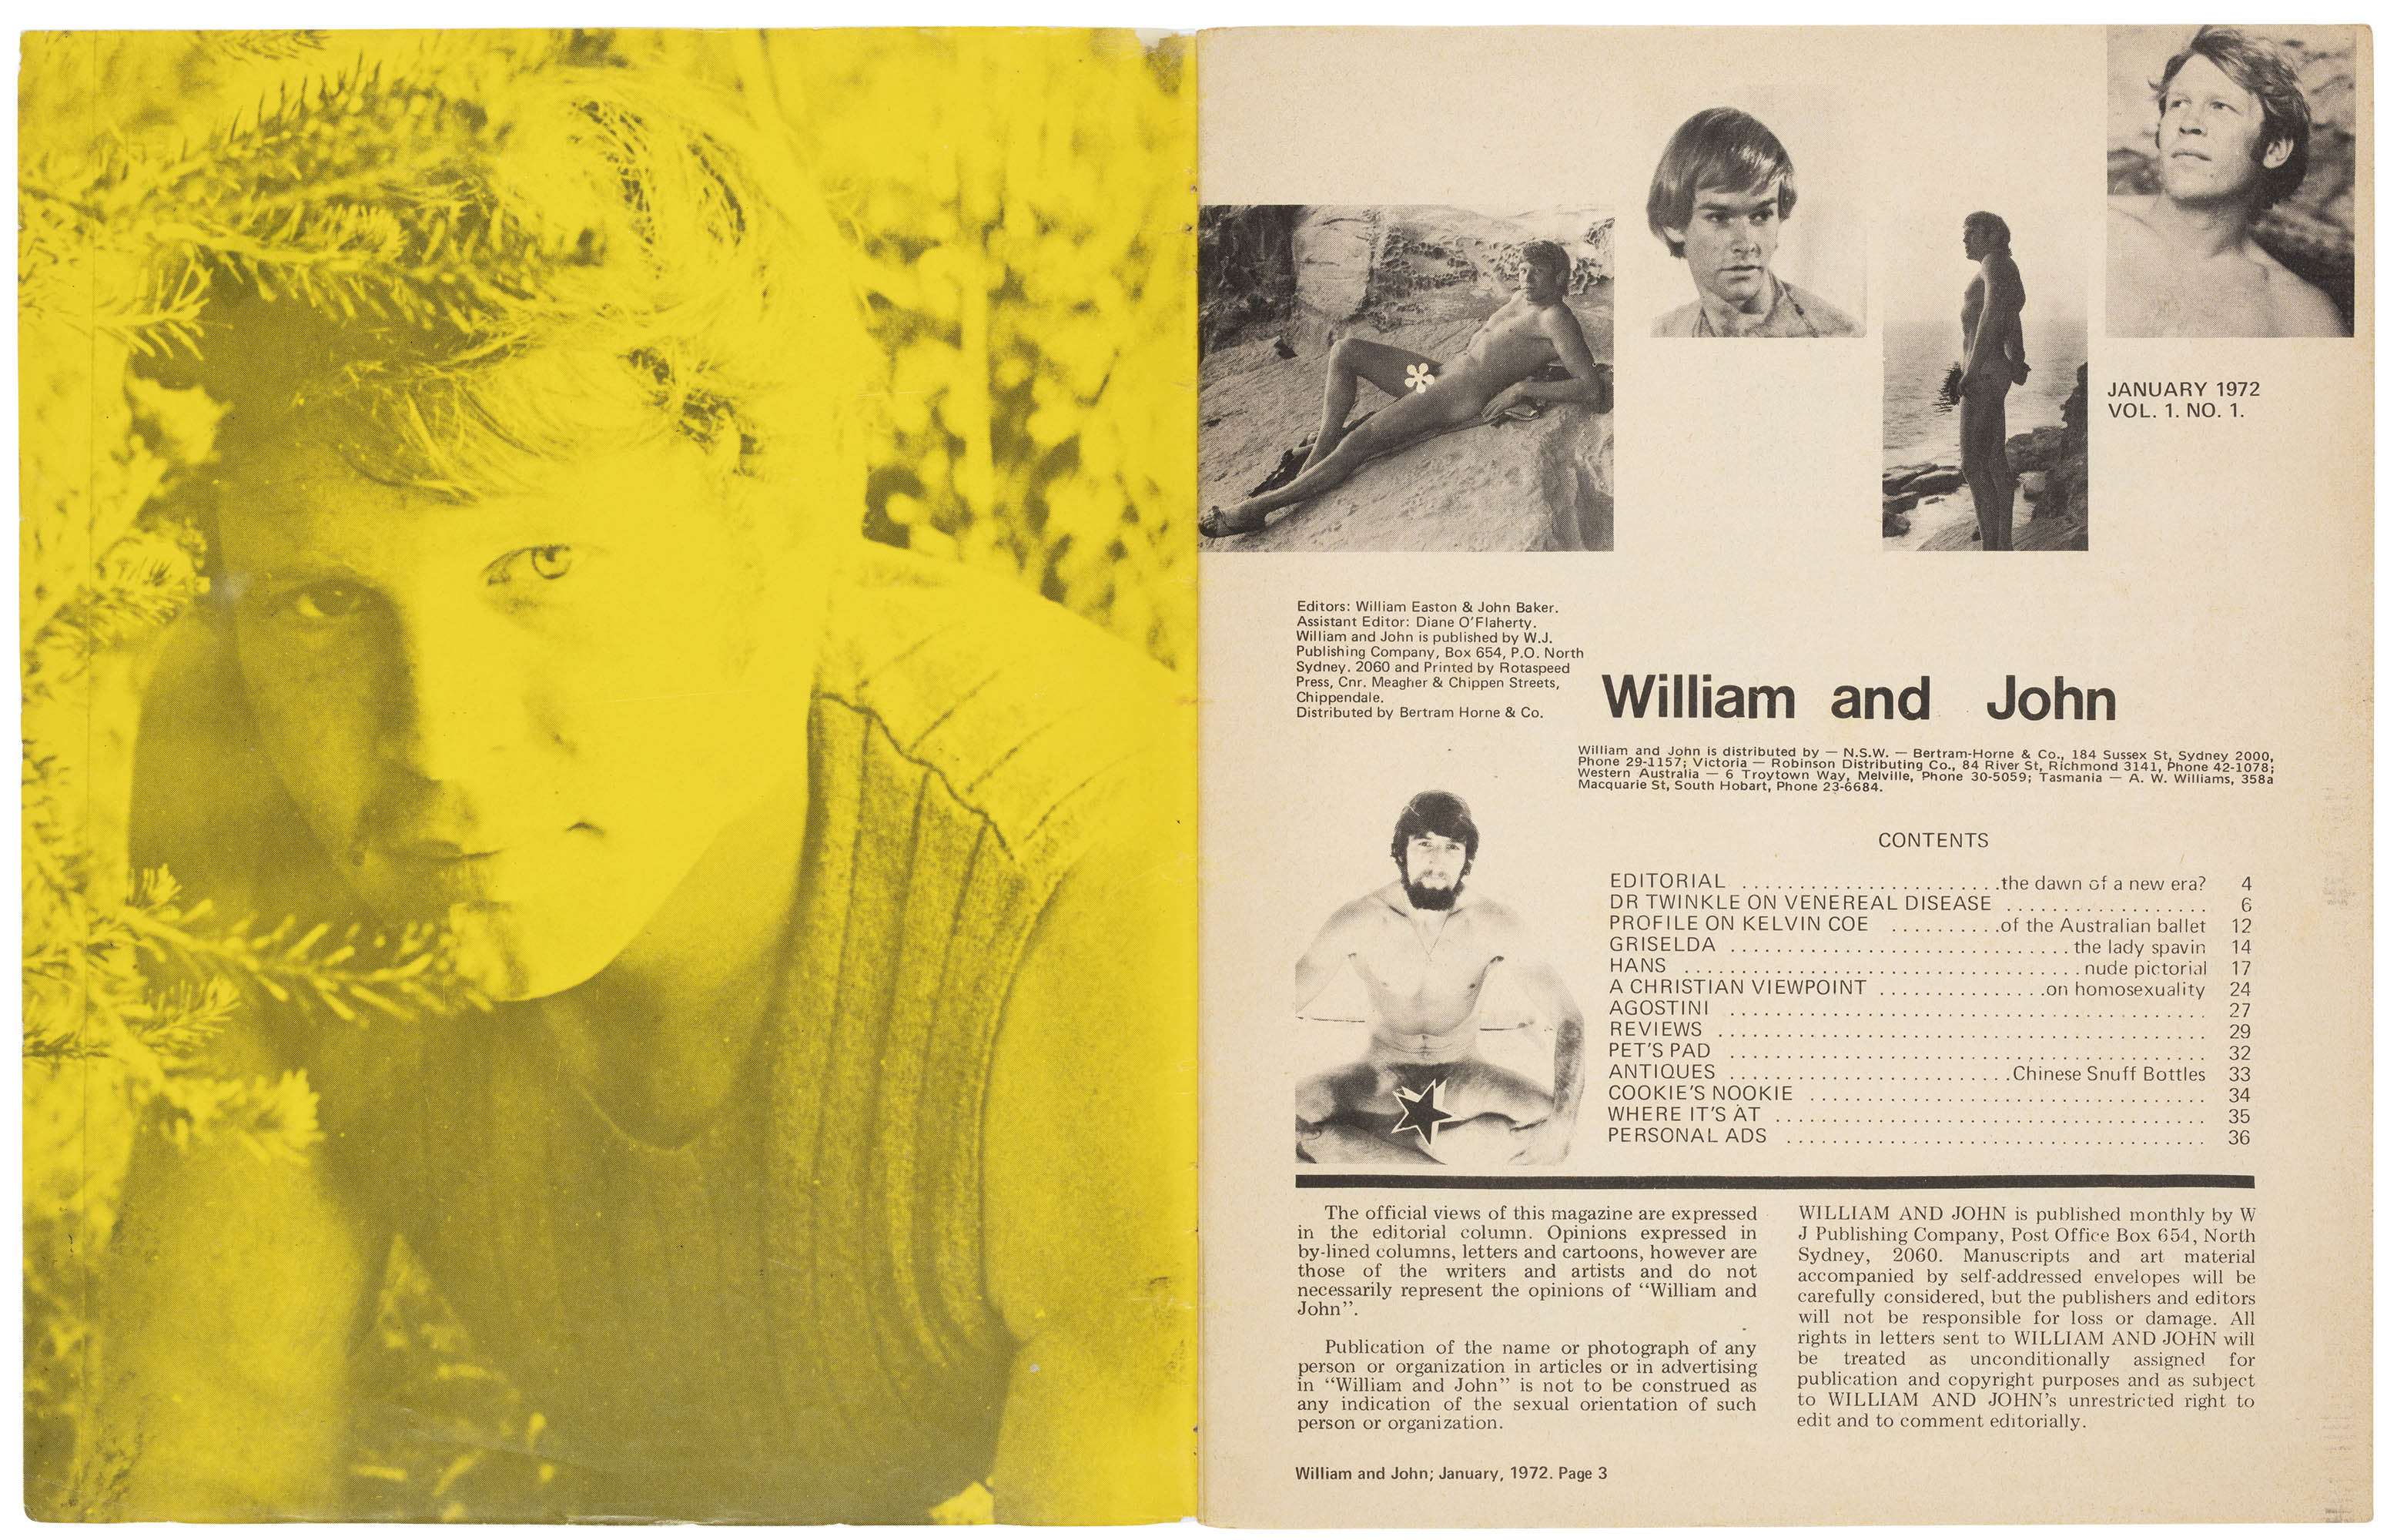 Inside cover and contents, p.2-3, William and John, Vol 1. no.1